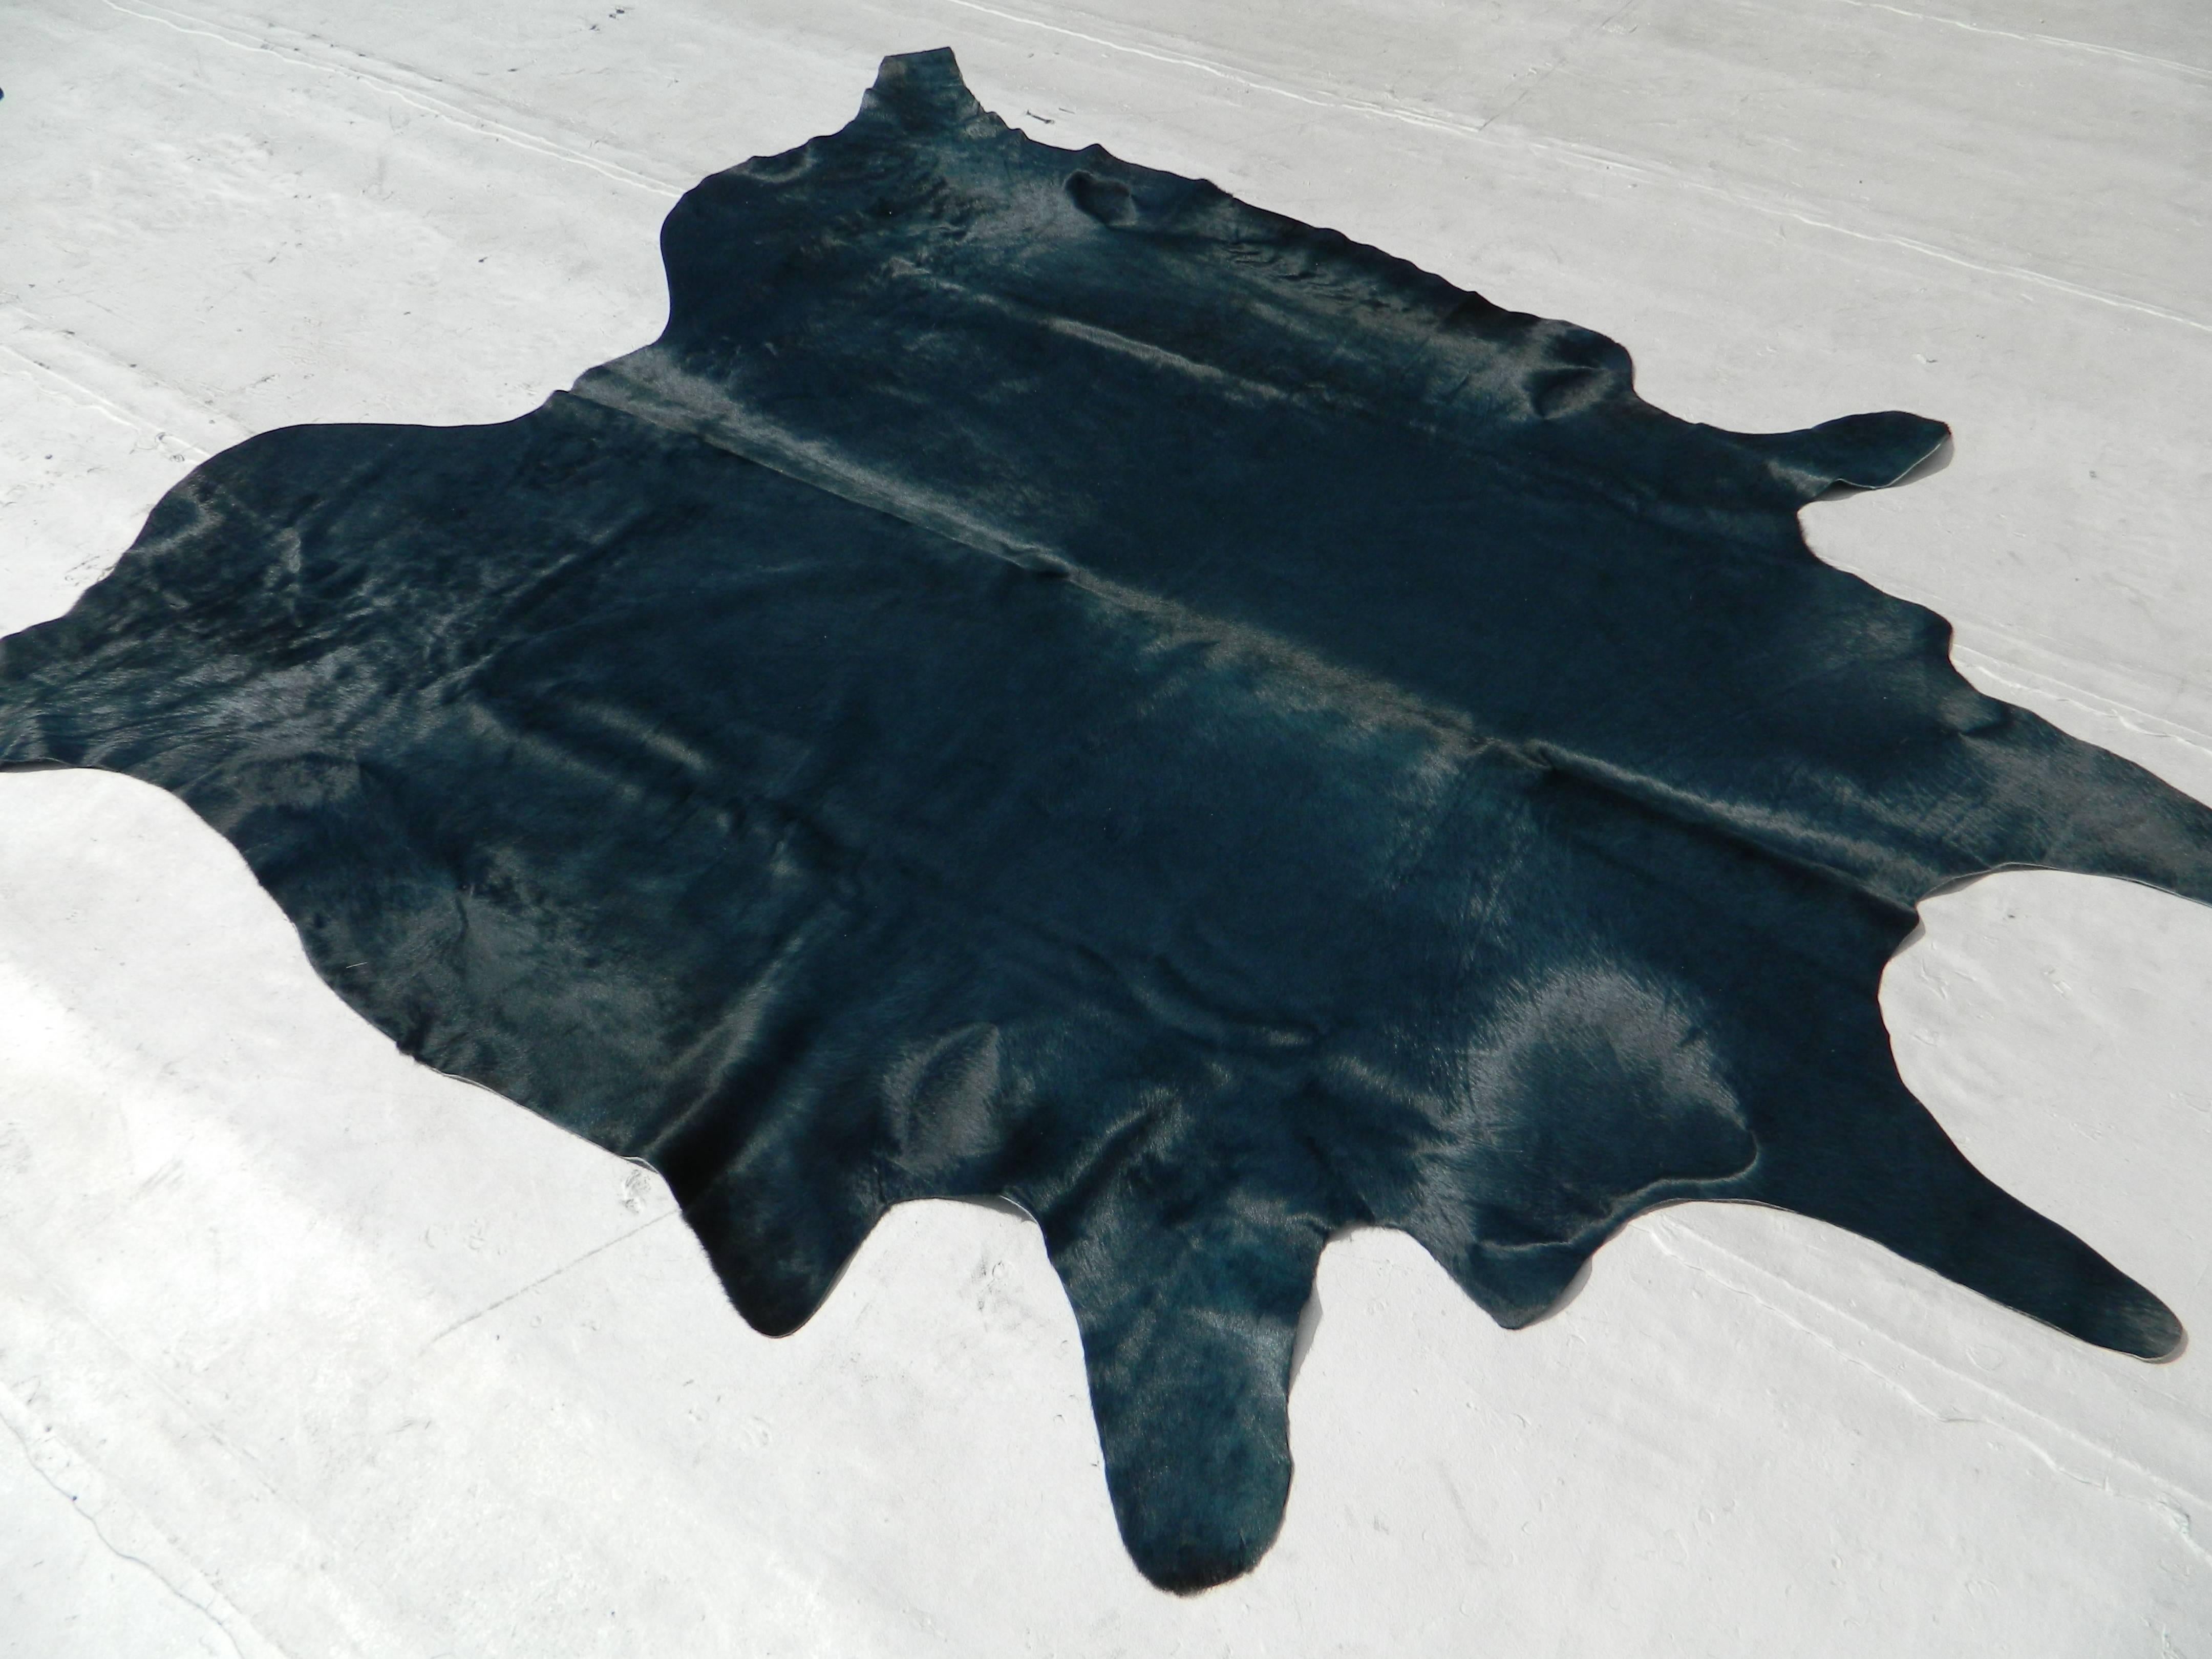 Beautiful solid Black Brazilian cowhide rug
Approximately 40 square feet
